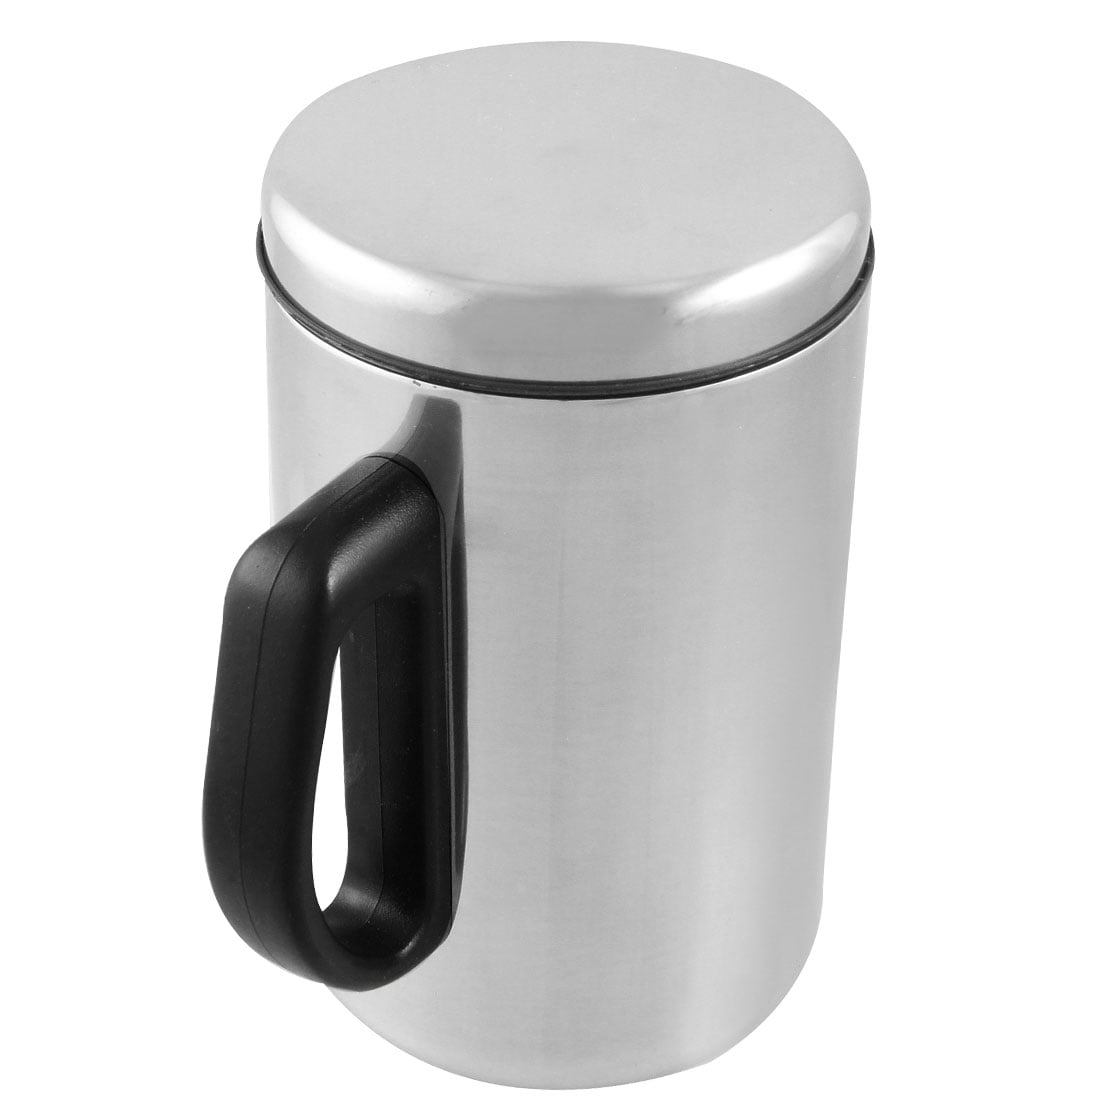 500ml Stainless Steel Drink Container Tea Coffee Cup Mug